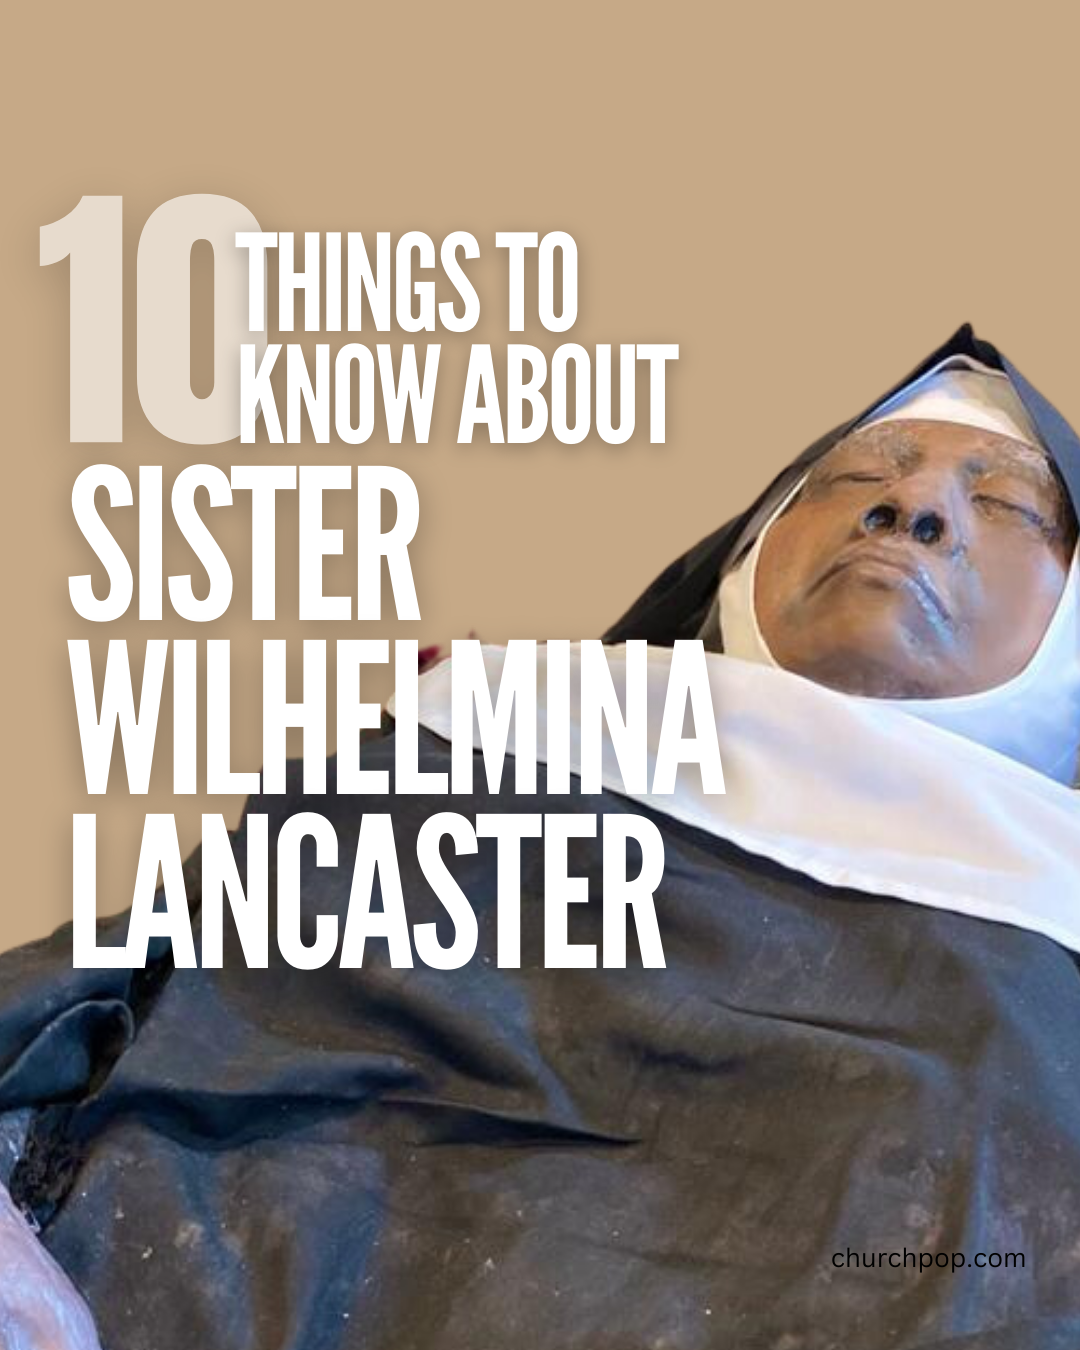 10 Things to Know & Share About Sister Wilhelmina Lancaster